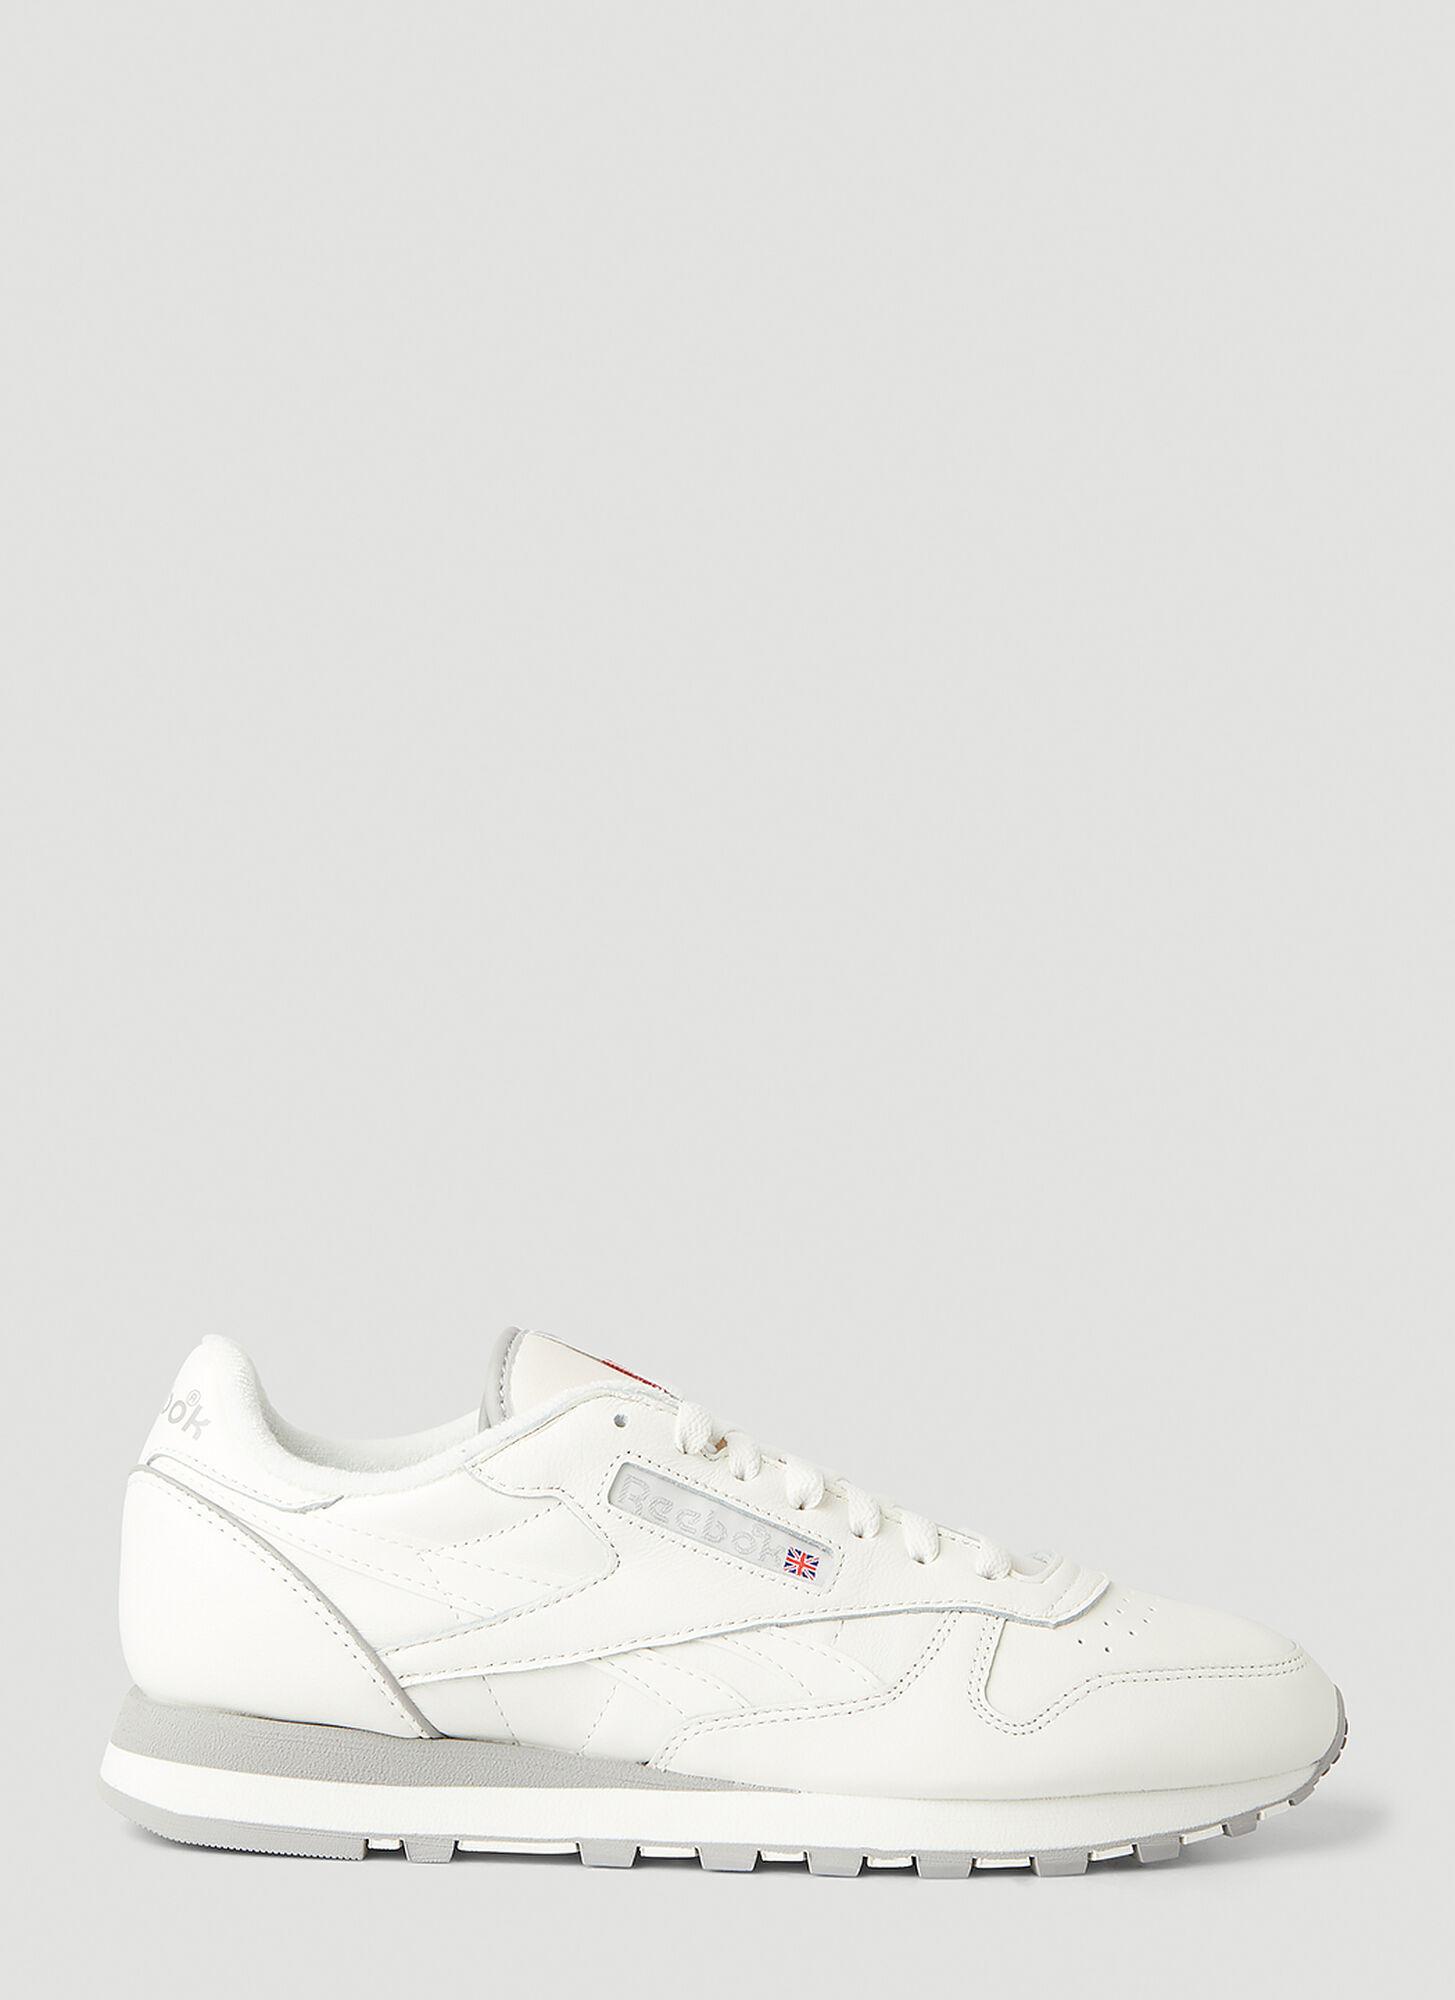 Reebok Classic Leather 1983 Vintage Sneakers in White | Lyst